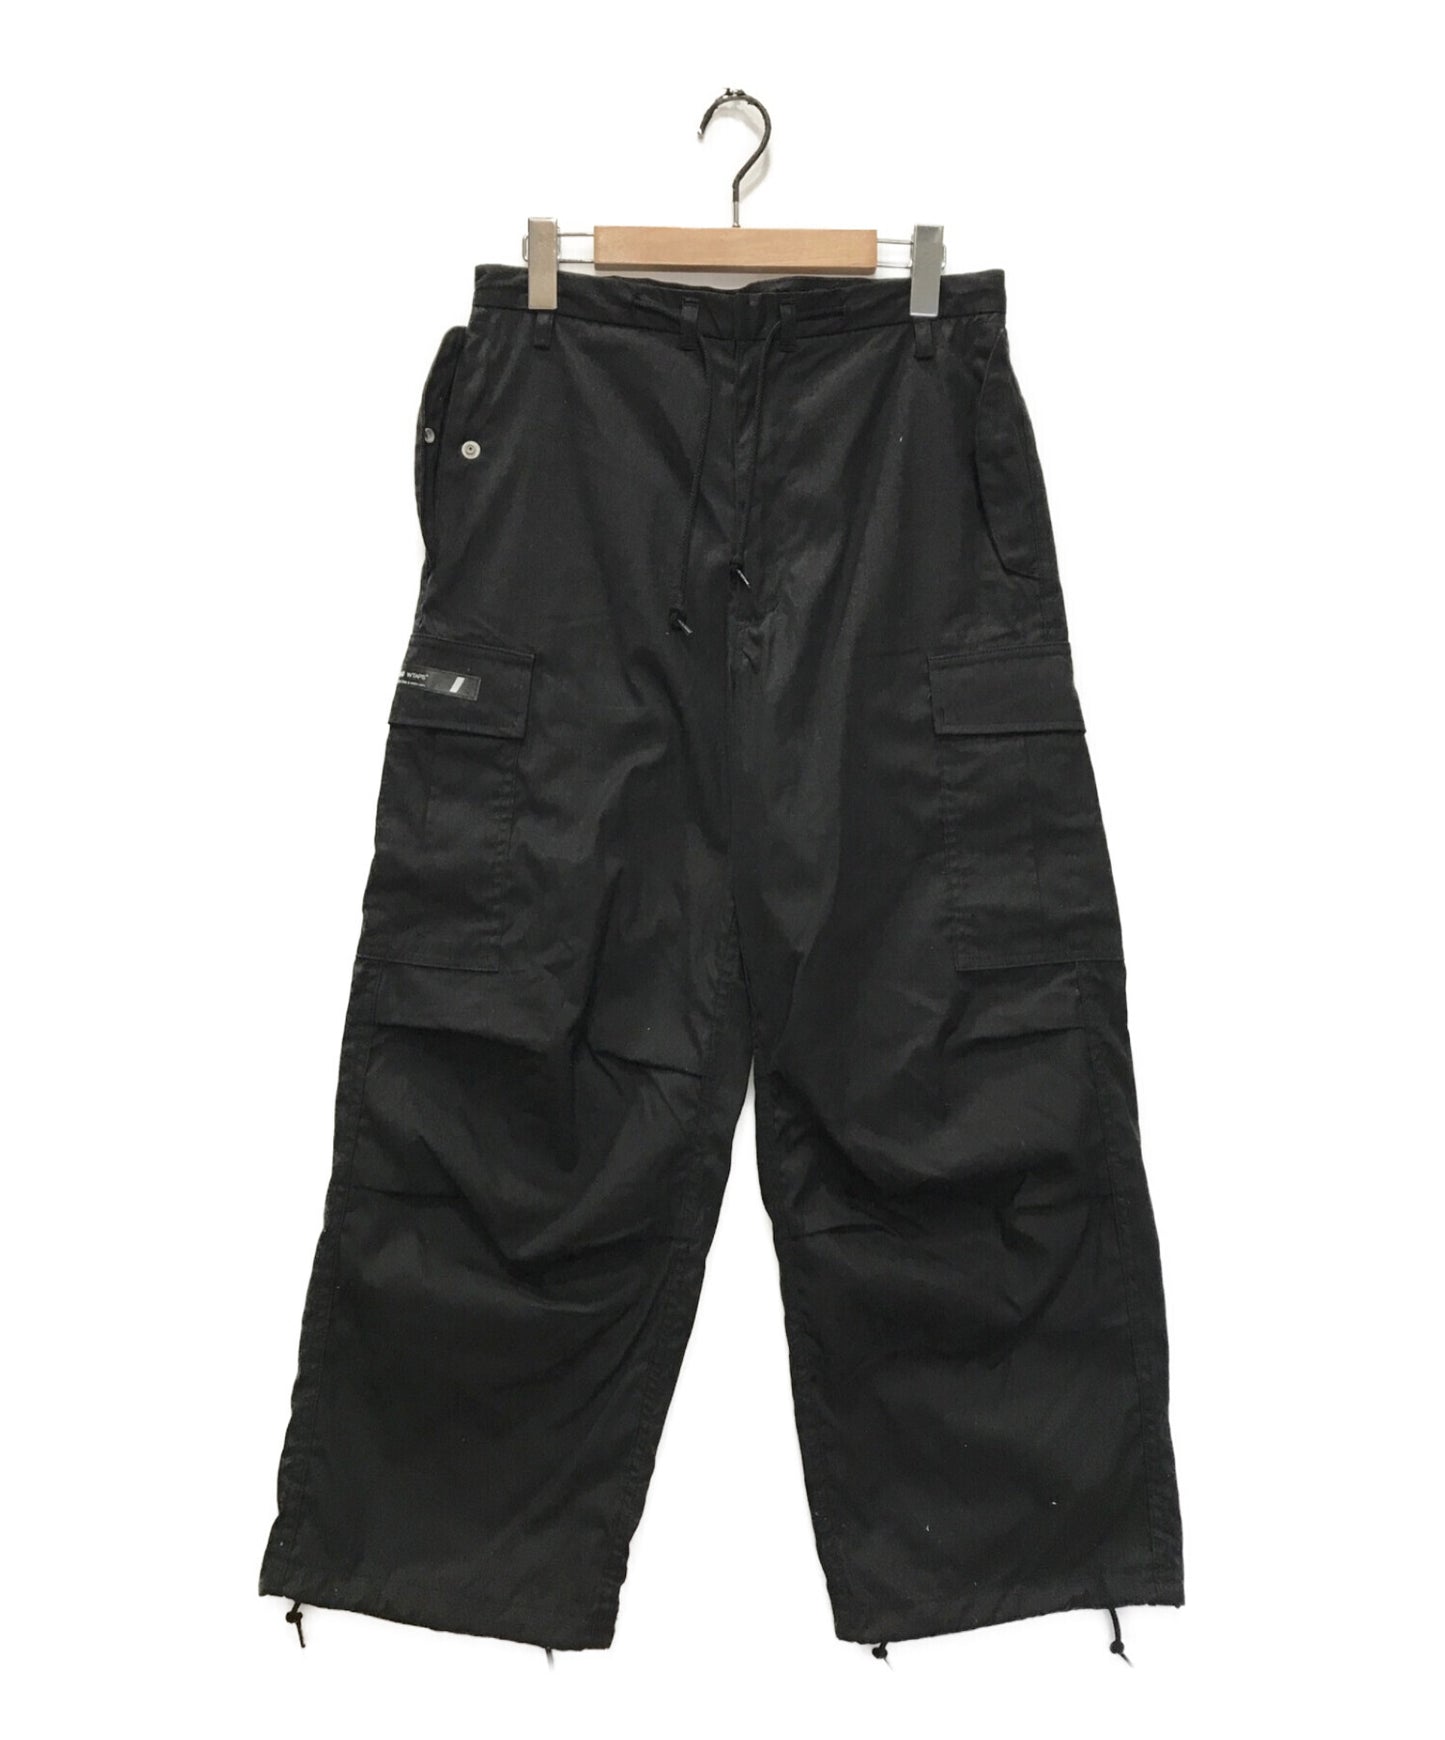 WTAPS TROUSERS / NYCO.OXFORD 231wvdt-ptm03